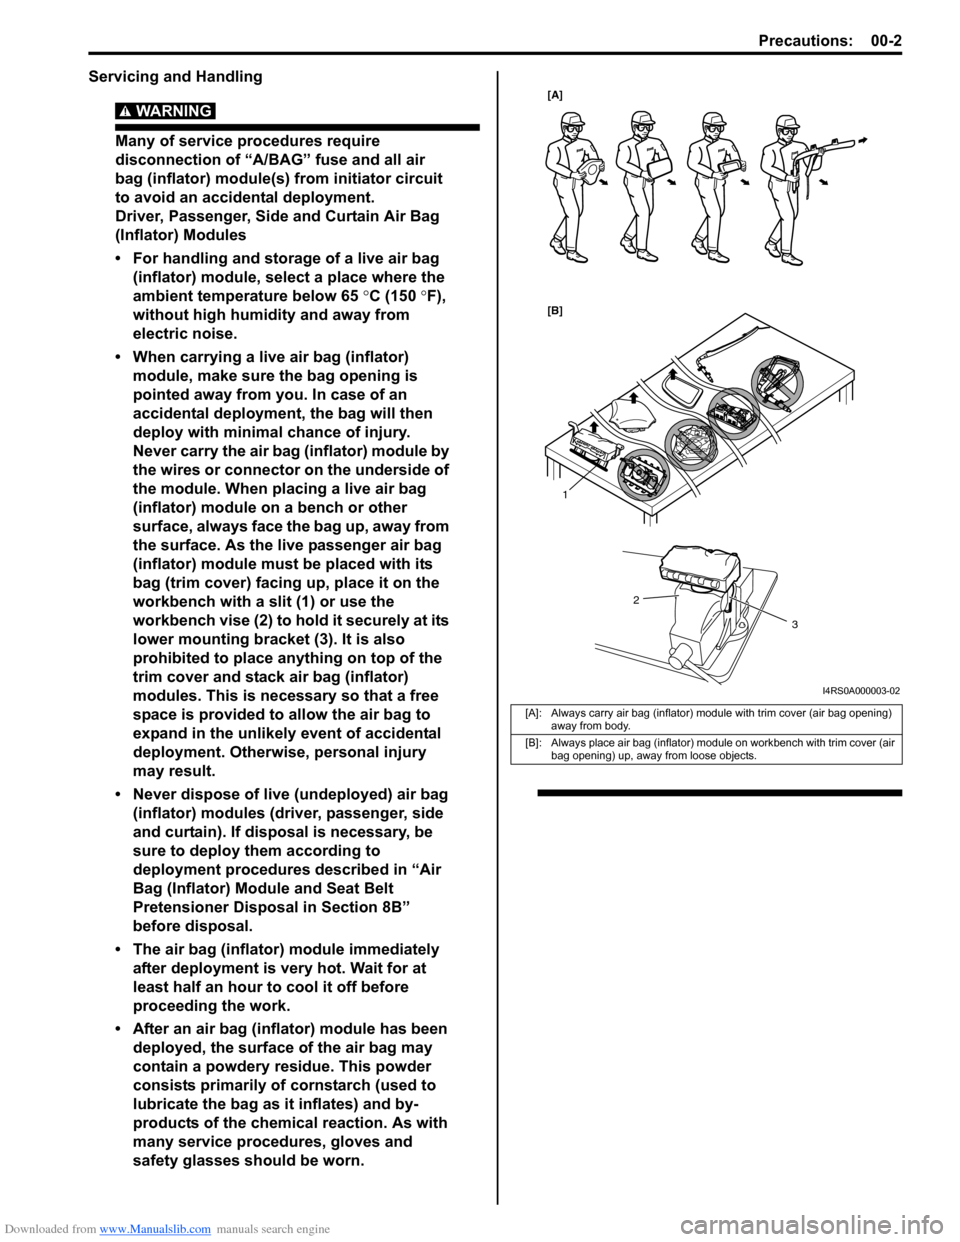 SUZUKI SWIFT 2007 2.G Service Workshop Manual Downloaded from www.Manualslib.com manuals search engine Precautions: 00-2
Servicing and Handling
WARNING! 
Many of service procedures require 
disconnection of “A/BAG” fuse and all air 
bag (infl